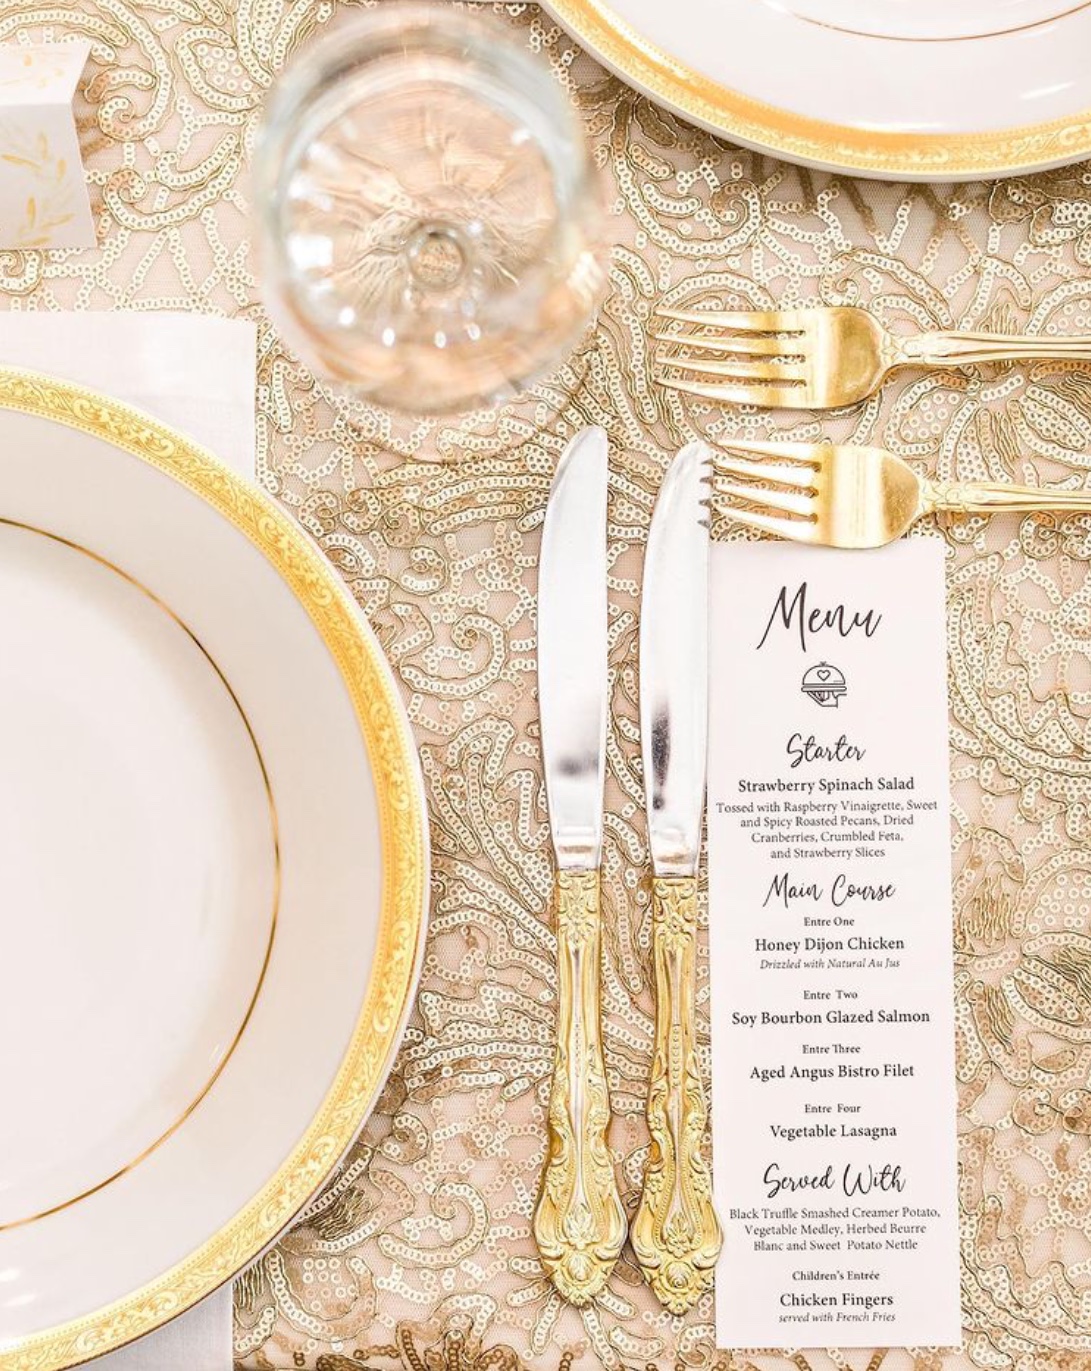 gold plate setting